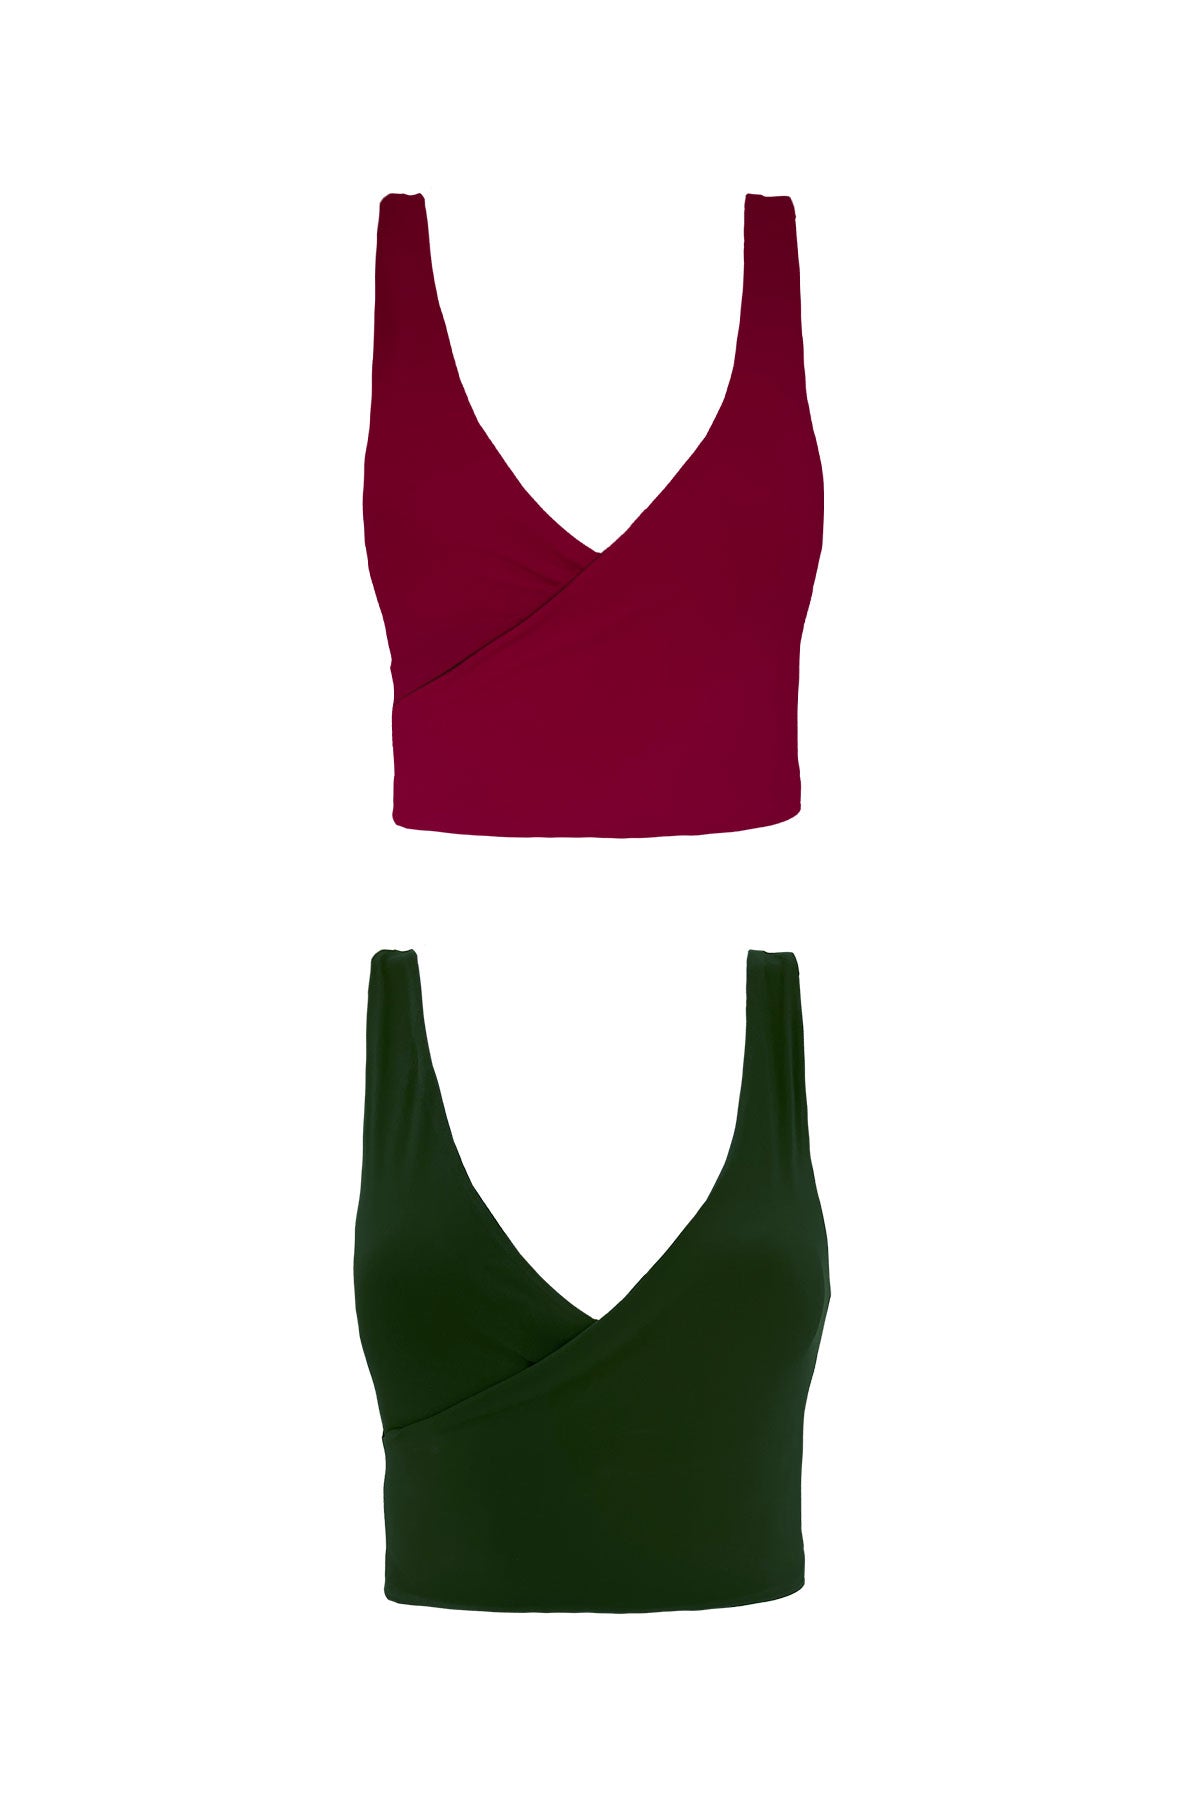 Buy IN MY BEAUTIFULLY WRAP-OVER MAROON RED, V-NECK, CROP TOP for